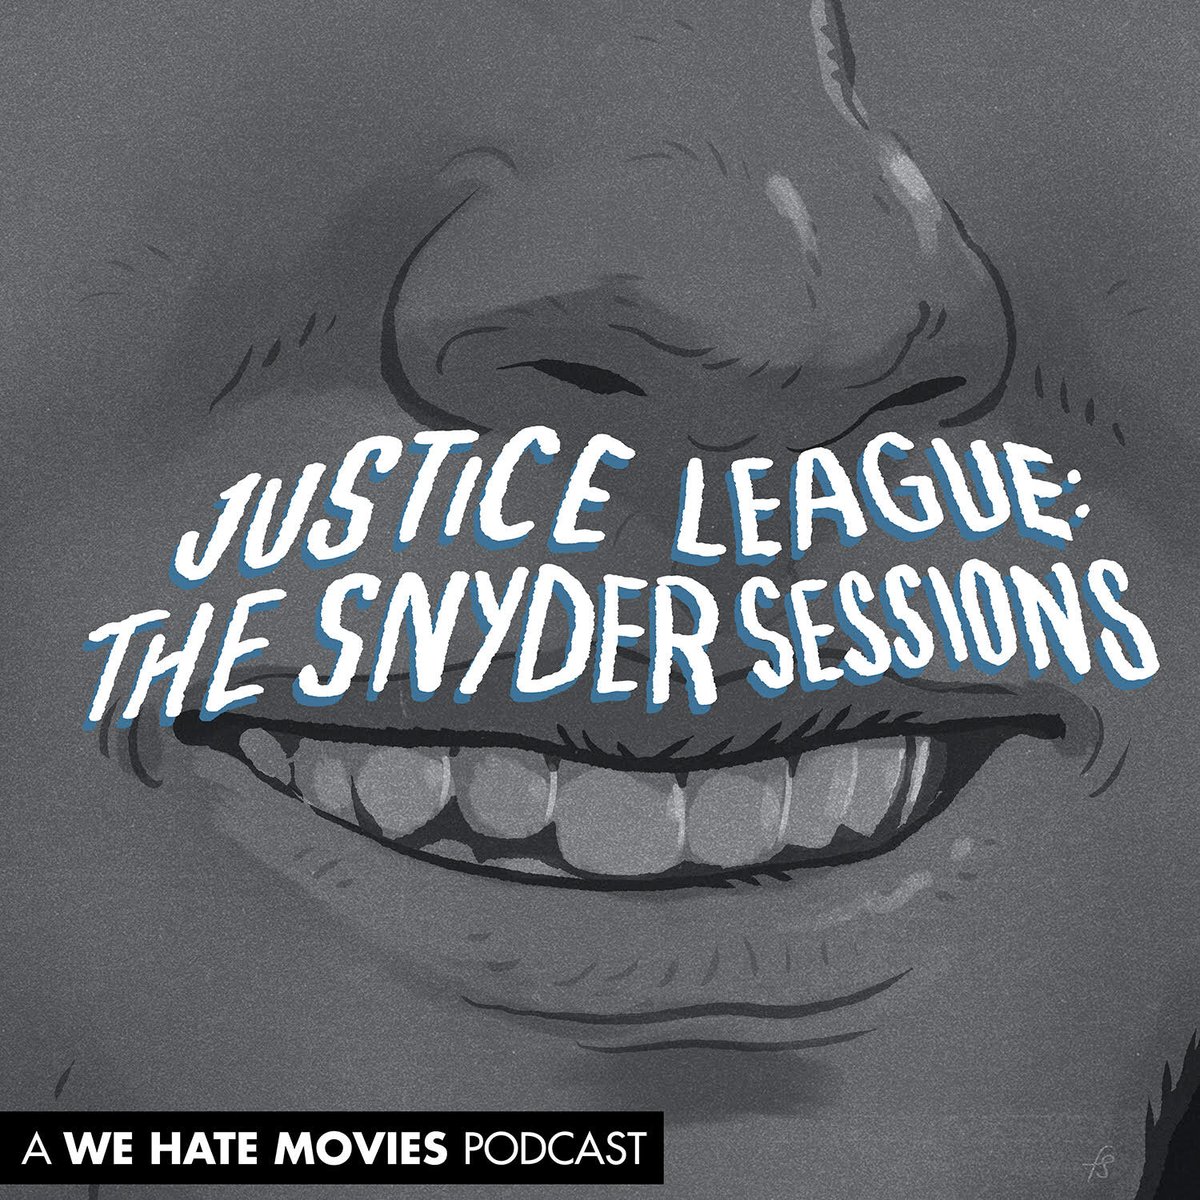 Cover art for WHM's Justice League: The Snyder Sessions podcast: A black and white drawing of a smiling mouth and nose